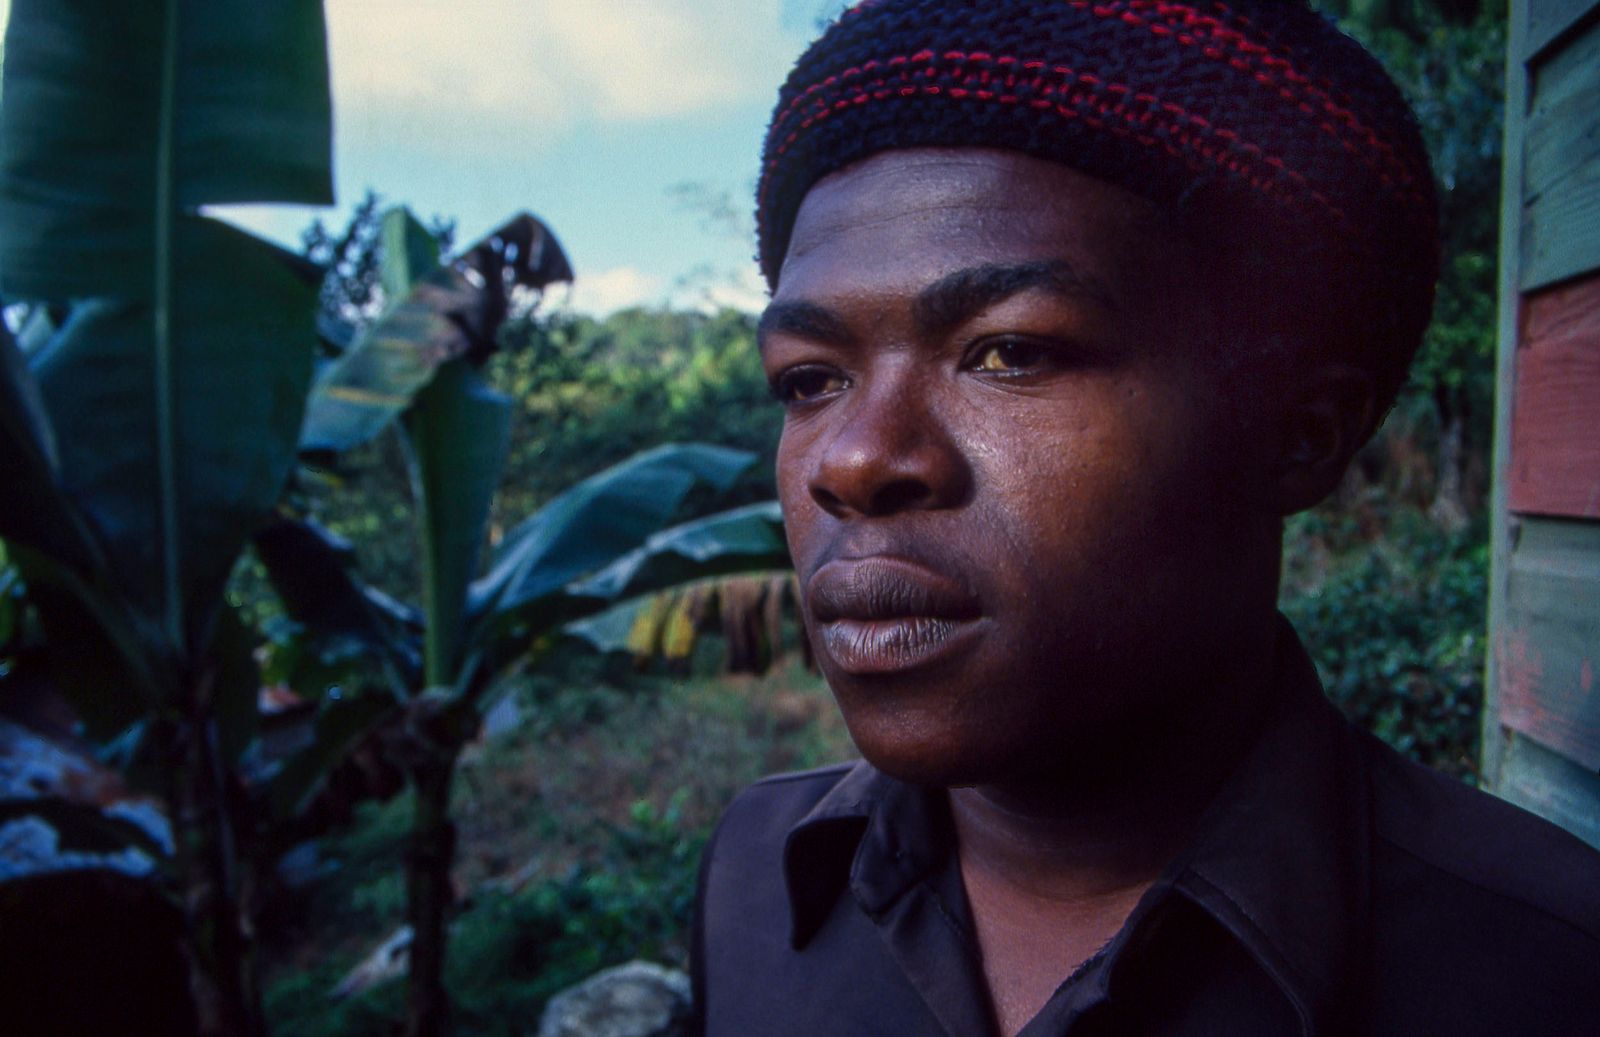 © Steven Edson - Portrait of a man up in the rural center of Jamaica.